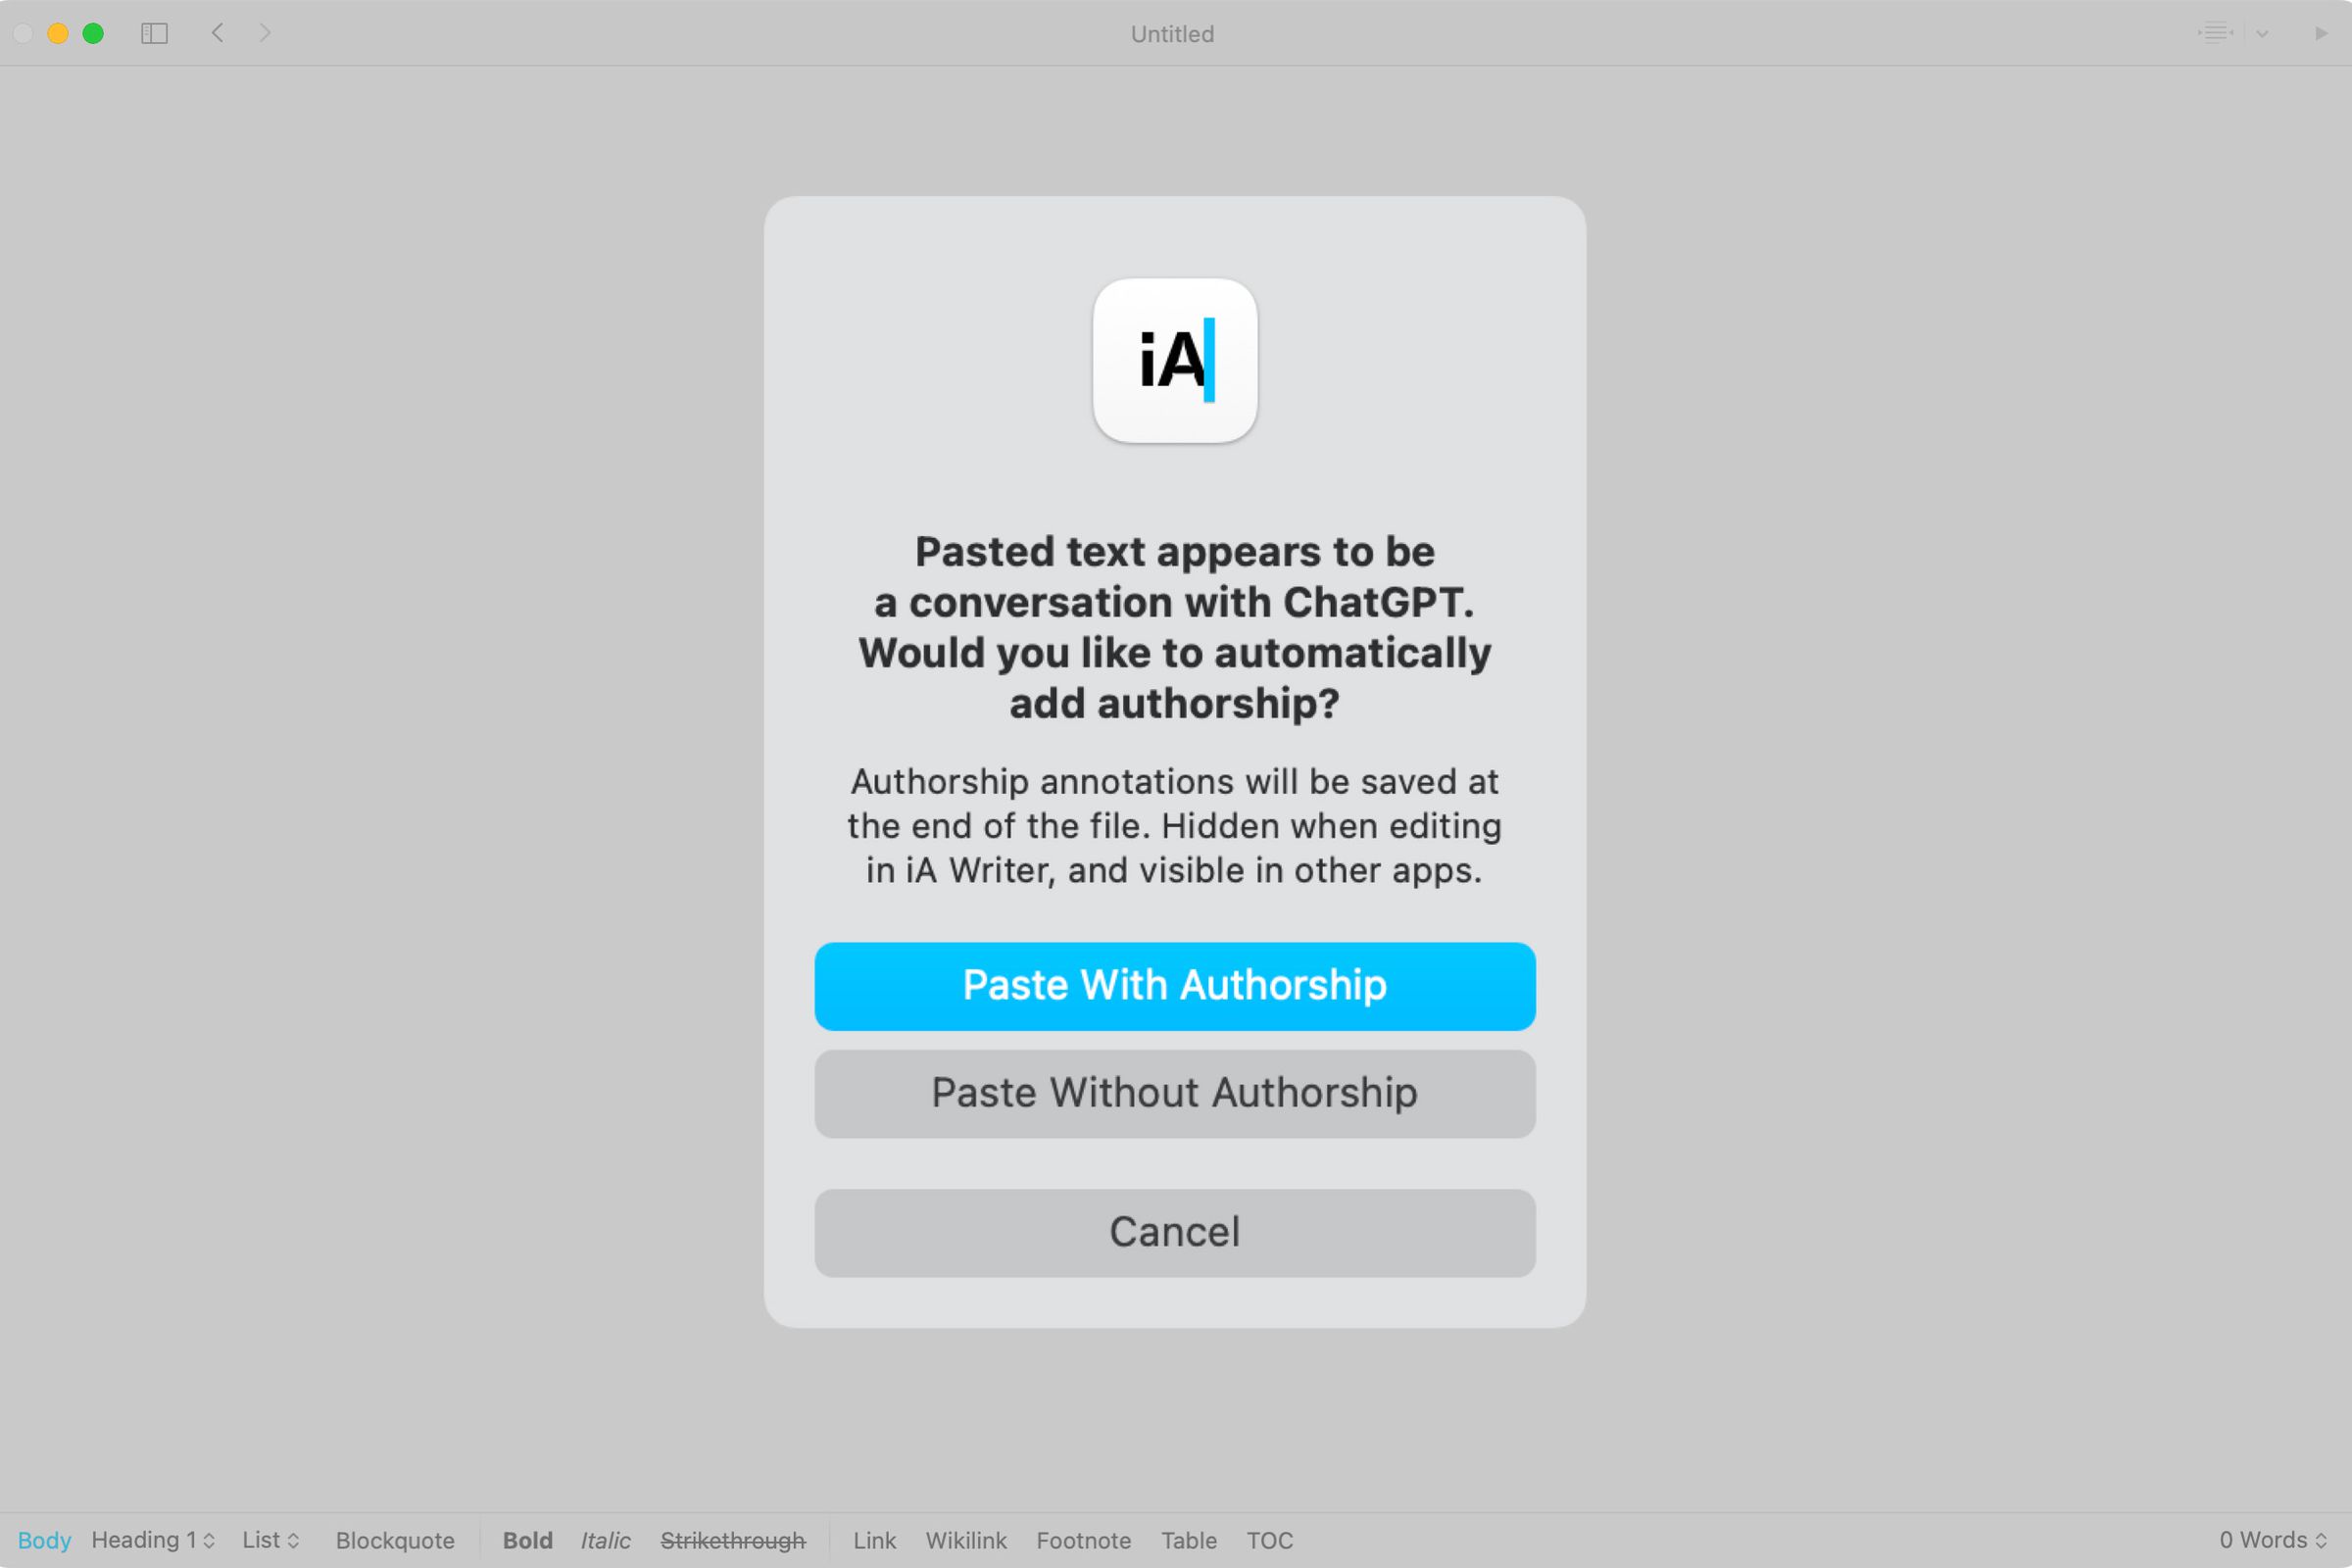 A dialog box asking if you’d like to paste in text “with authorship.”